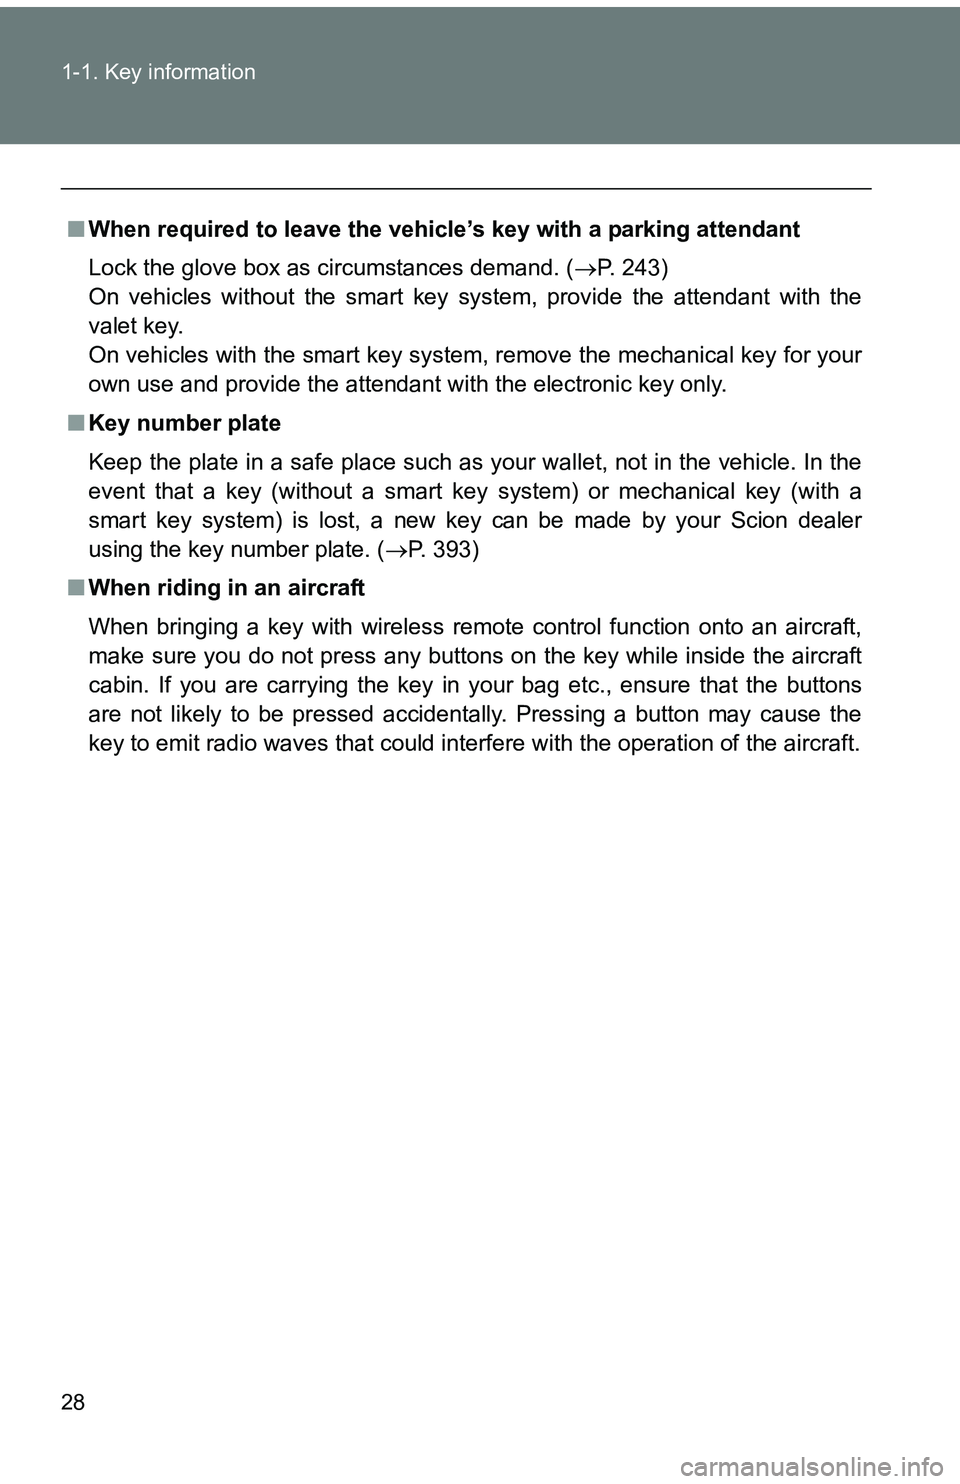 TOYOTA tC 2011  Owners Manual (in English) 28 1-1. Key information
■When required to leave the vehic le’s key with a parking attendant
Lock the glove box as circumstances demand. ( P. 243)
On vehicles without the smart key system, provi